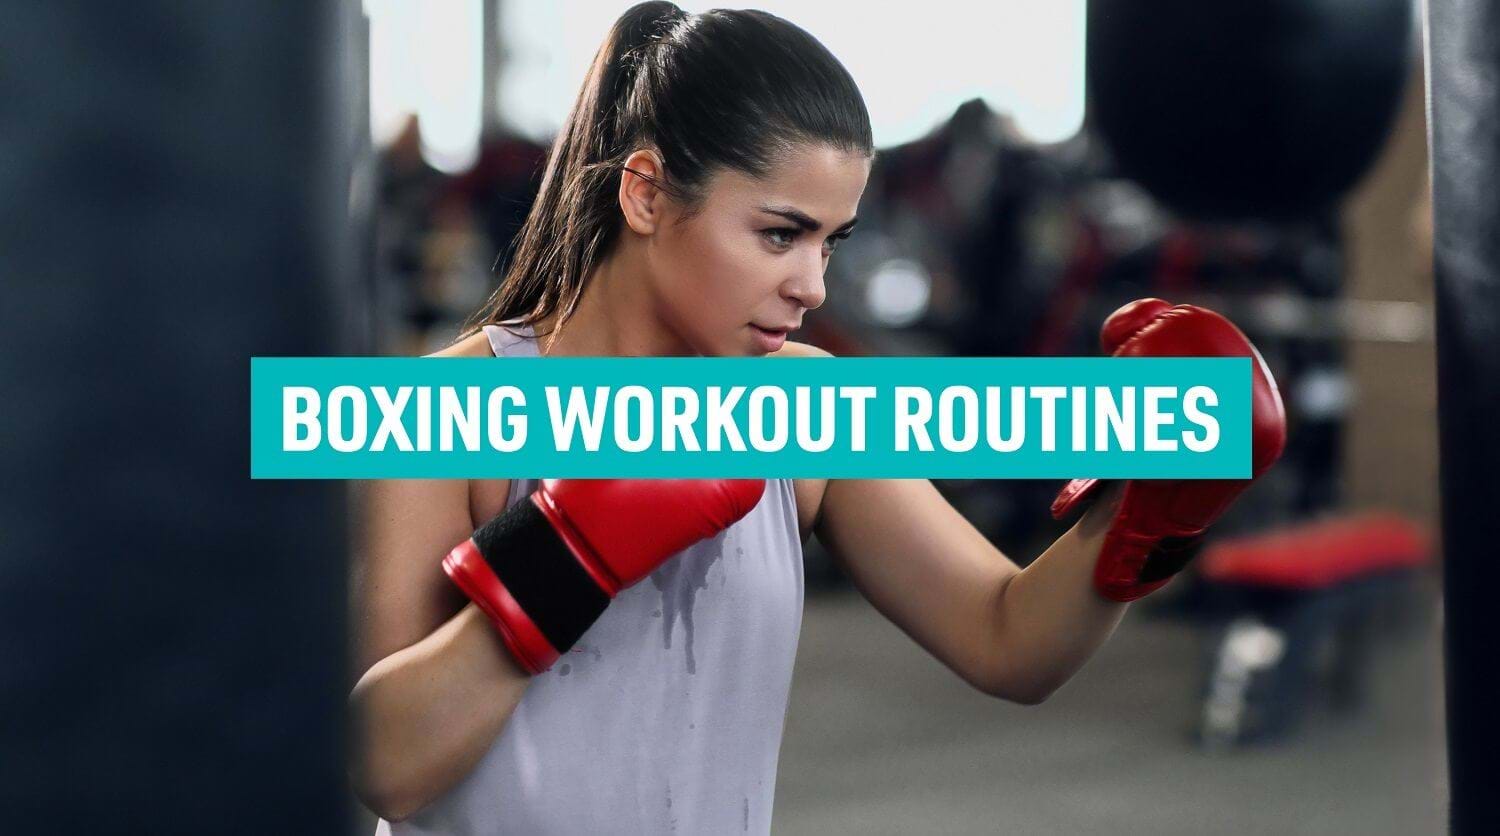 Boxer Body - Why Boxing Is A Good Way to Get in Shape